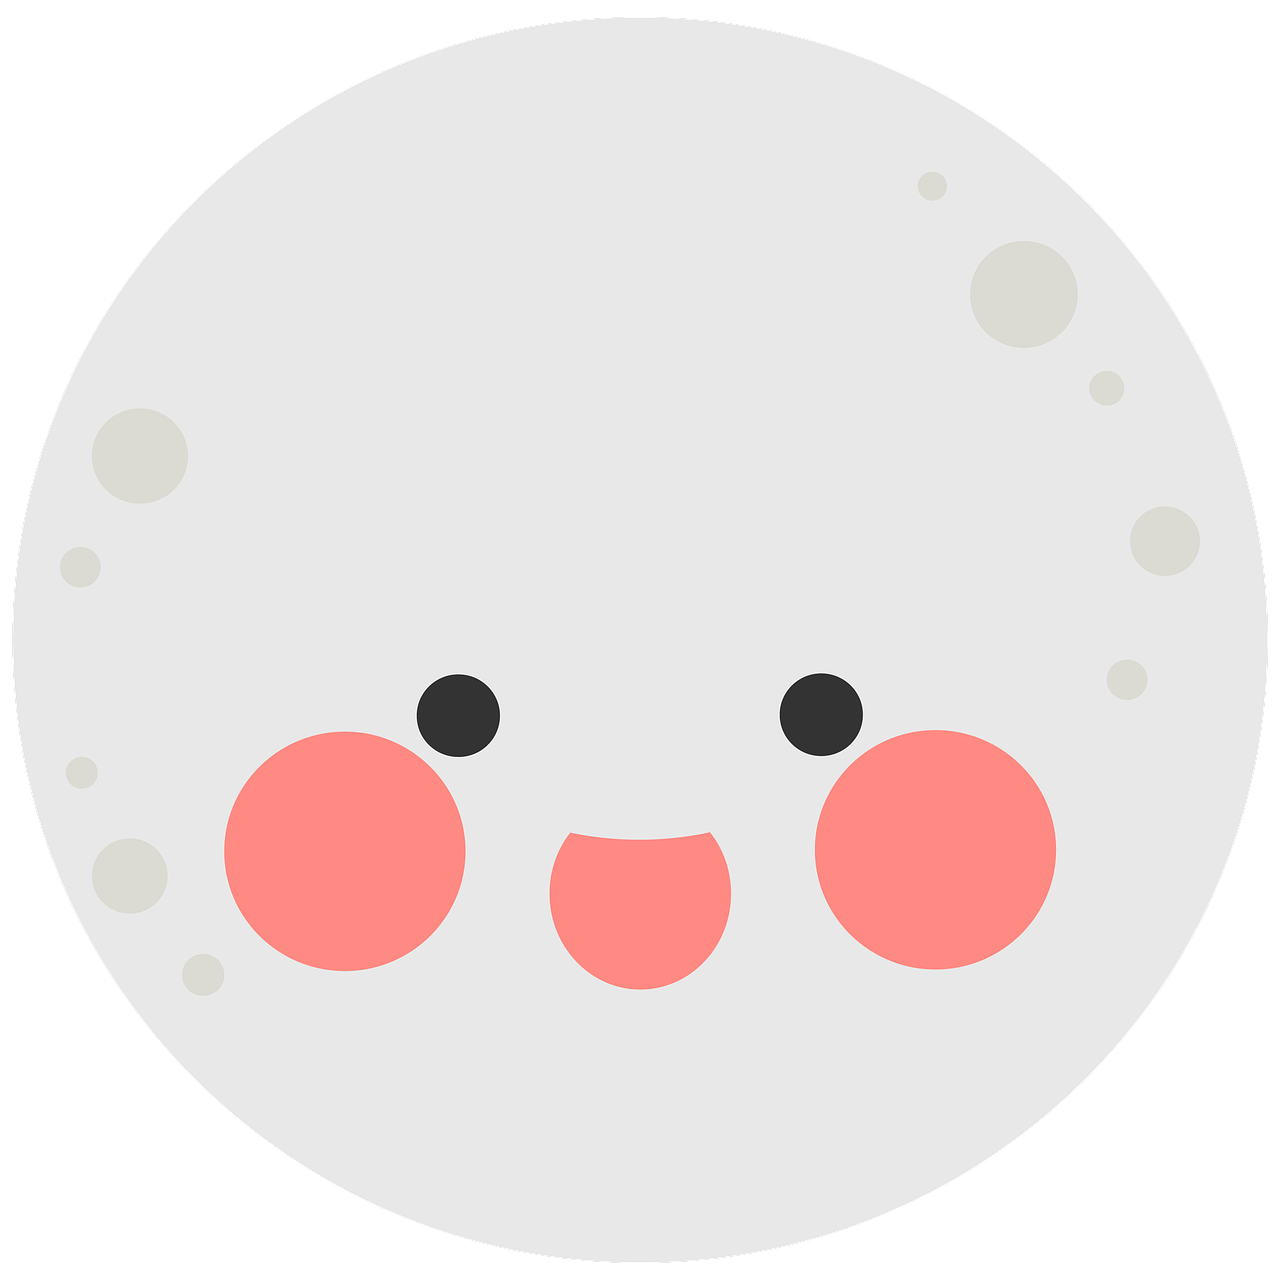 a white face with pink cheeks on a black background, mingei, big white moon background, full round face!, super cute and friendly, red dot